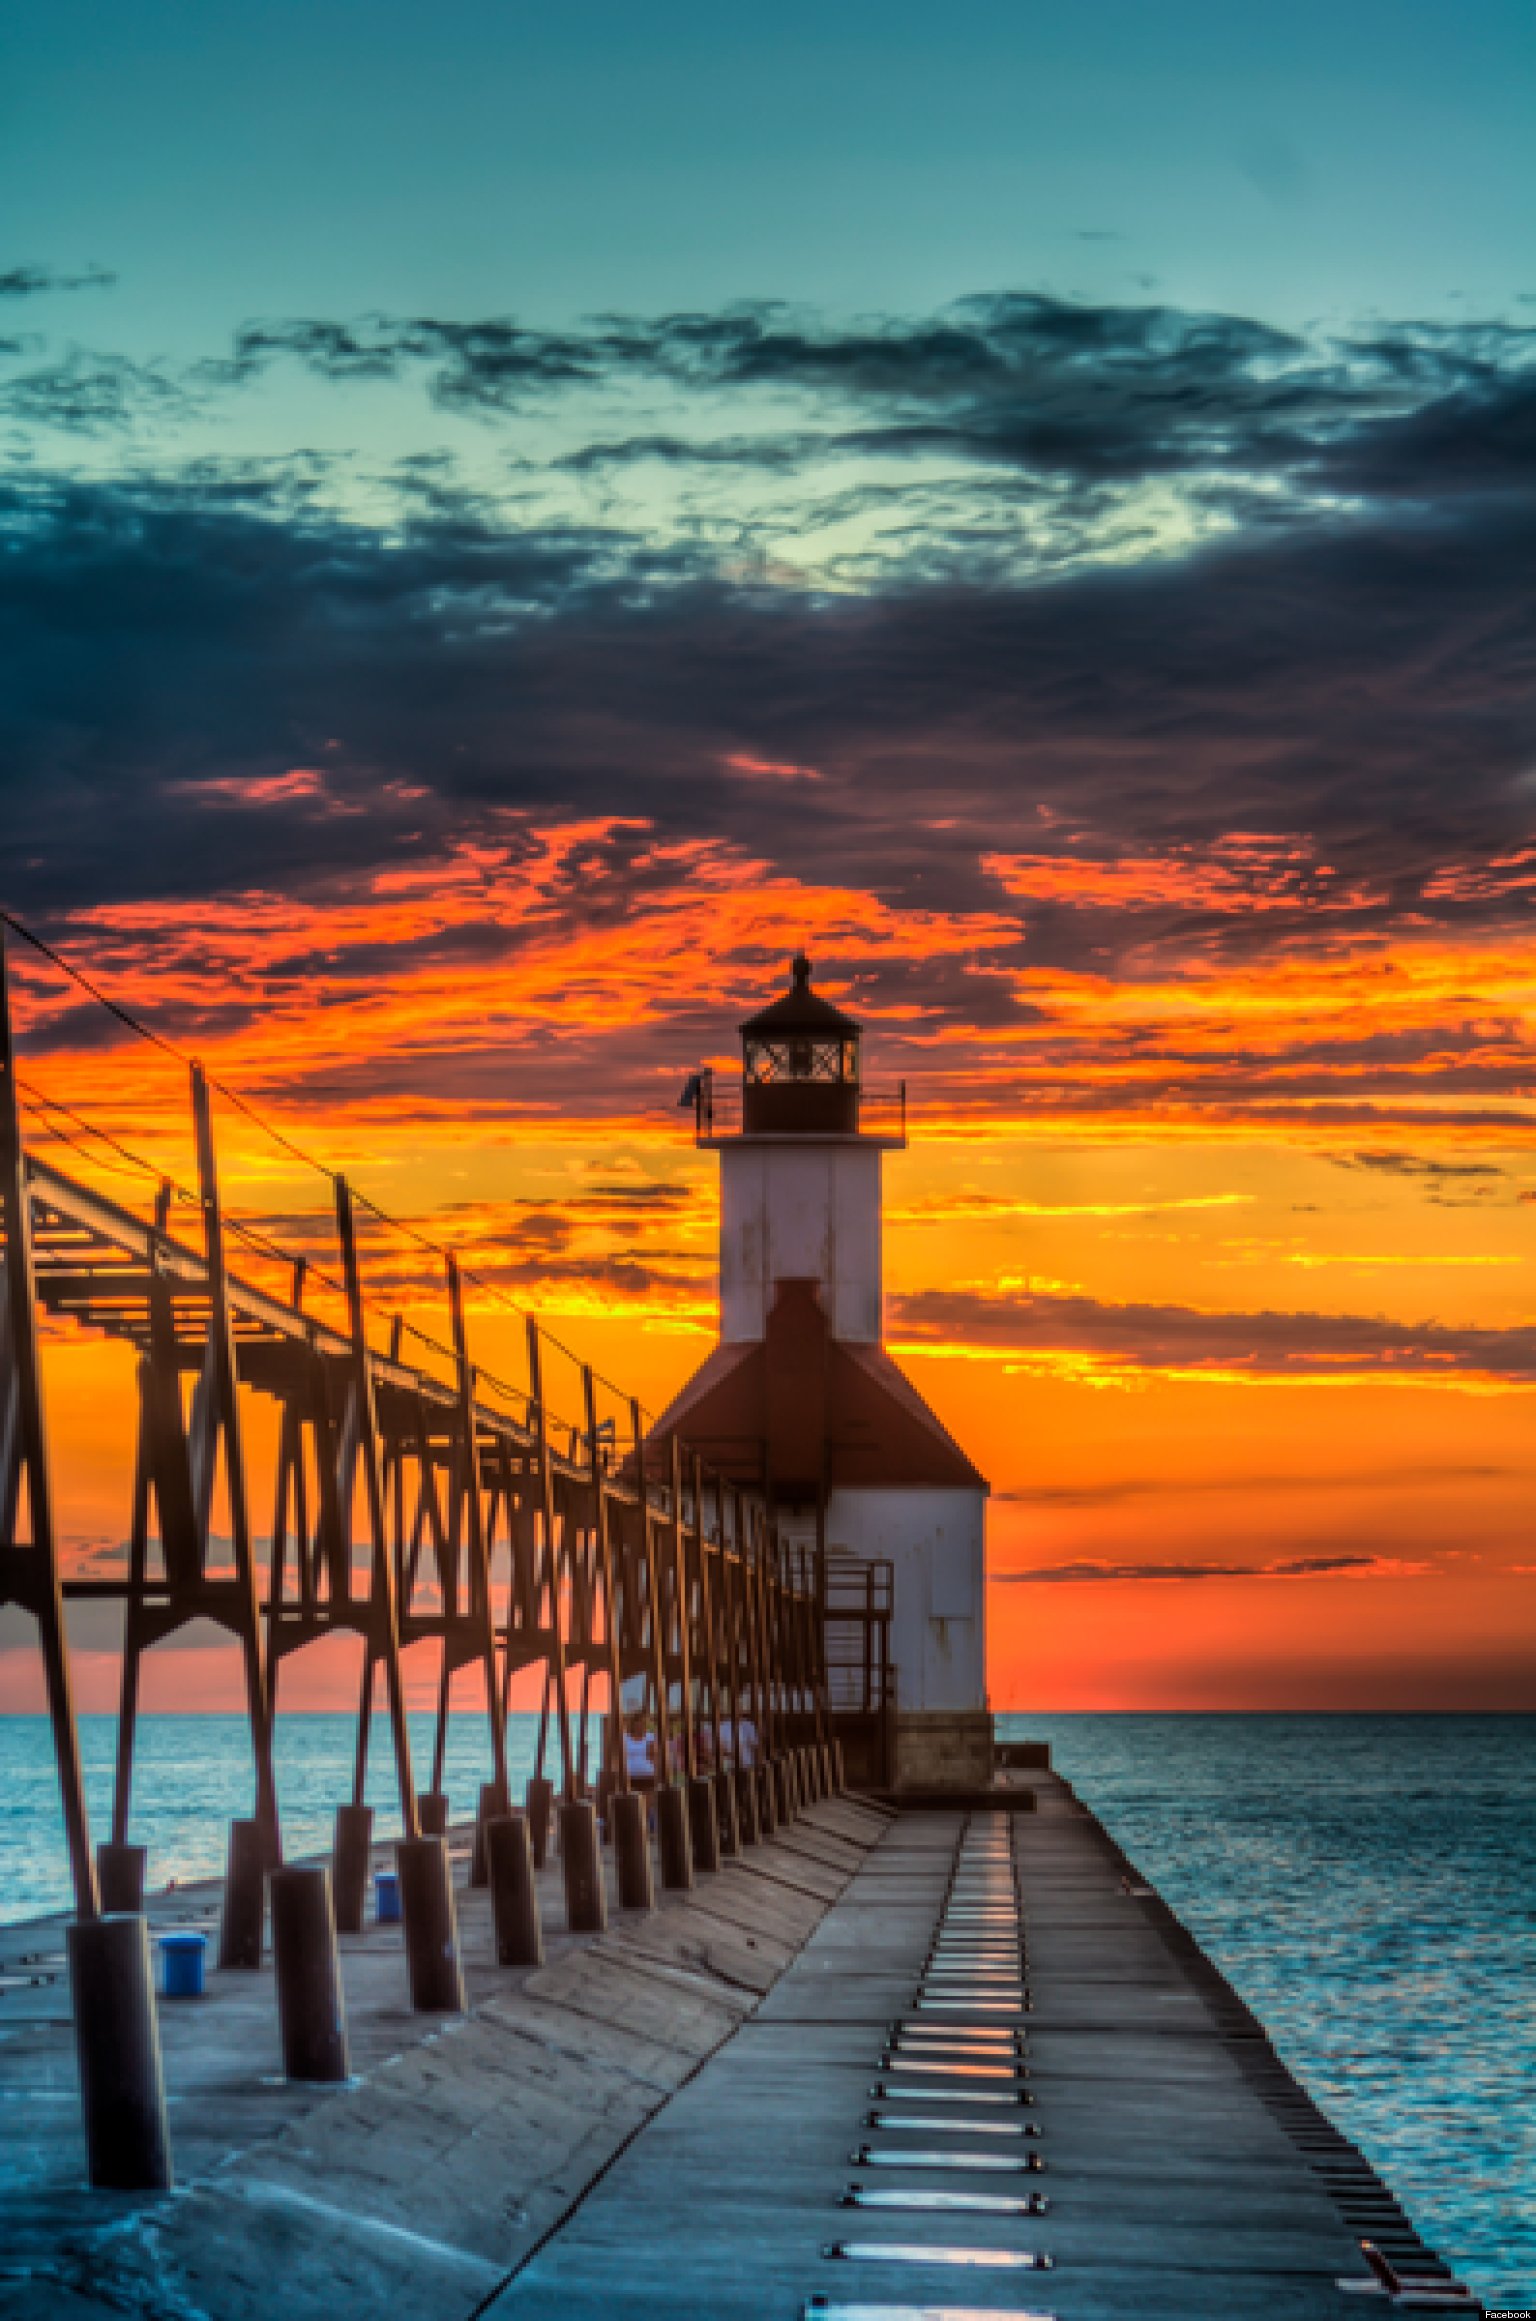 Pure Michigan Photos: Sean Chess Wins Tourism Agency&#039;s Contest To Show